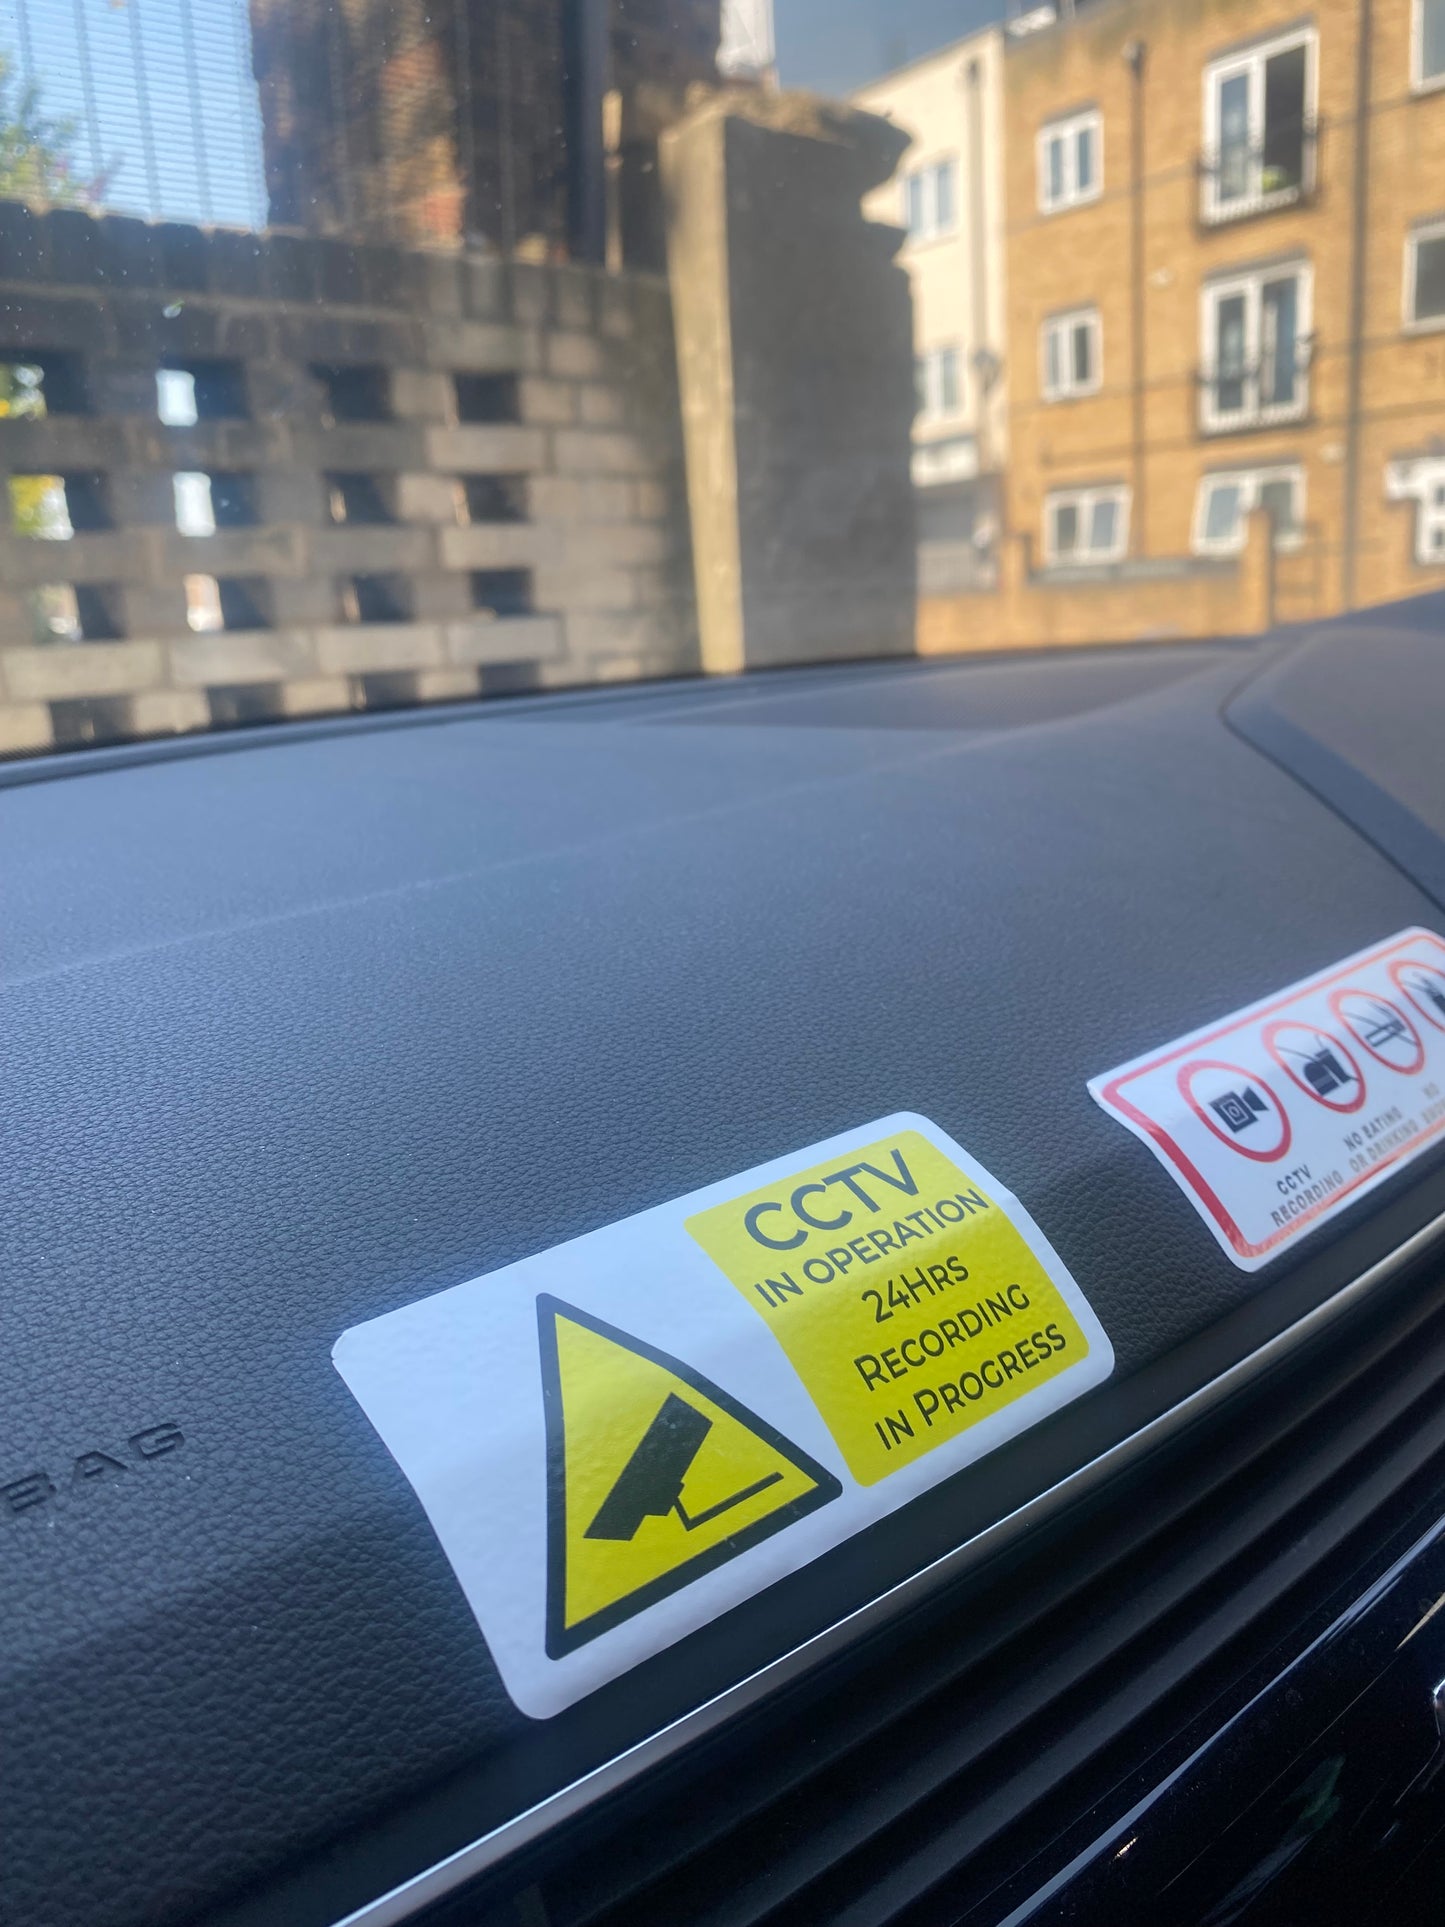 Cab / Taxi / Uber Safety Stickers